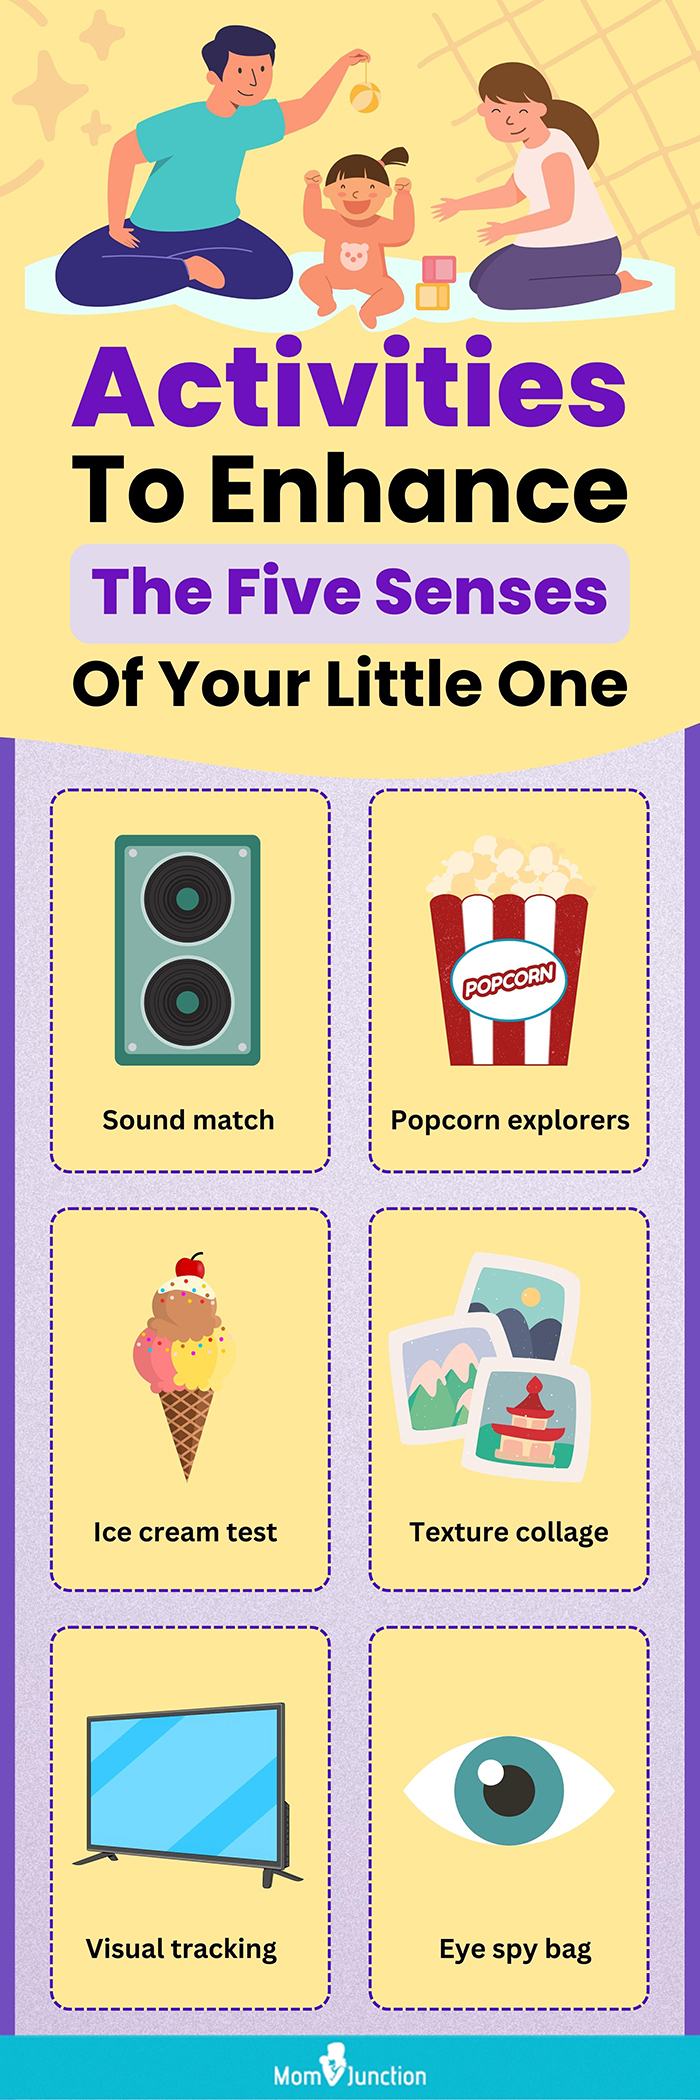 activities to enhance the five senses of your little one (infographic)